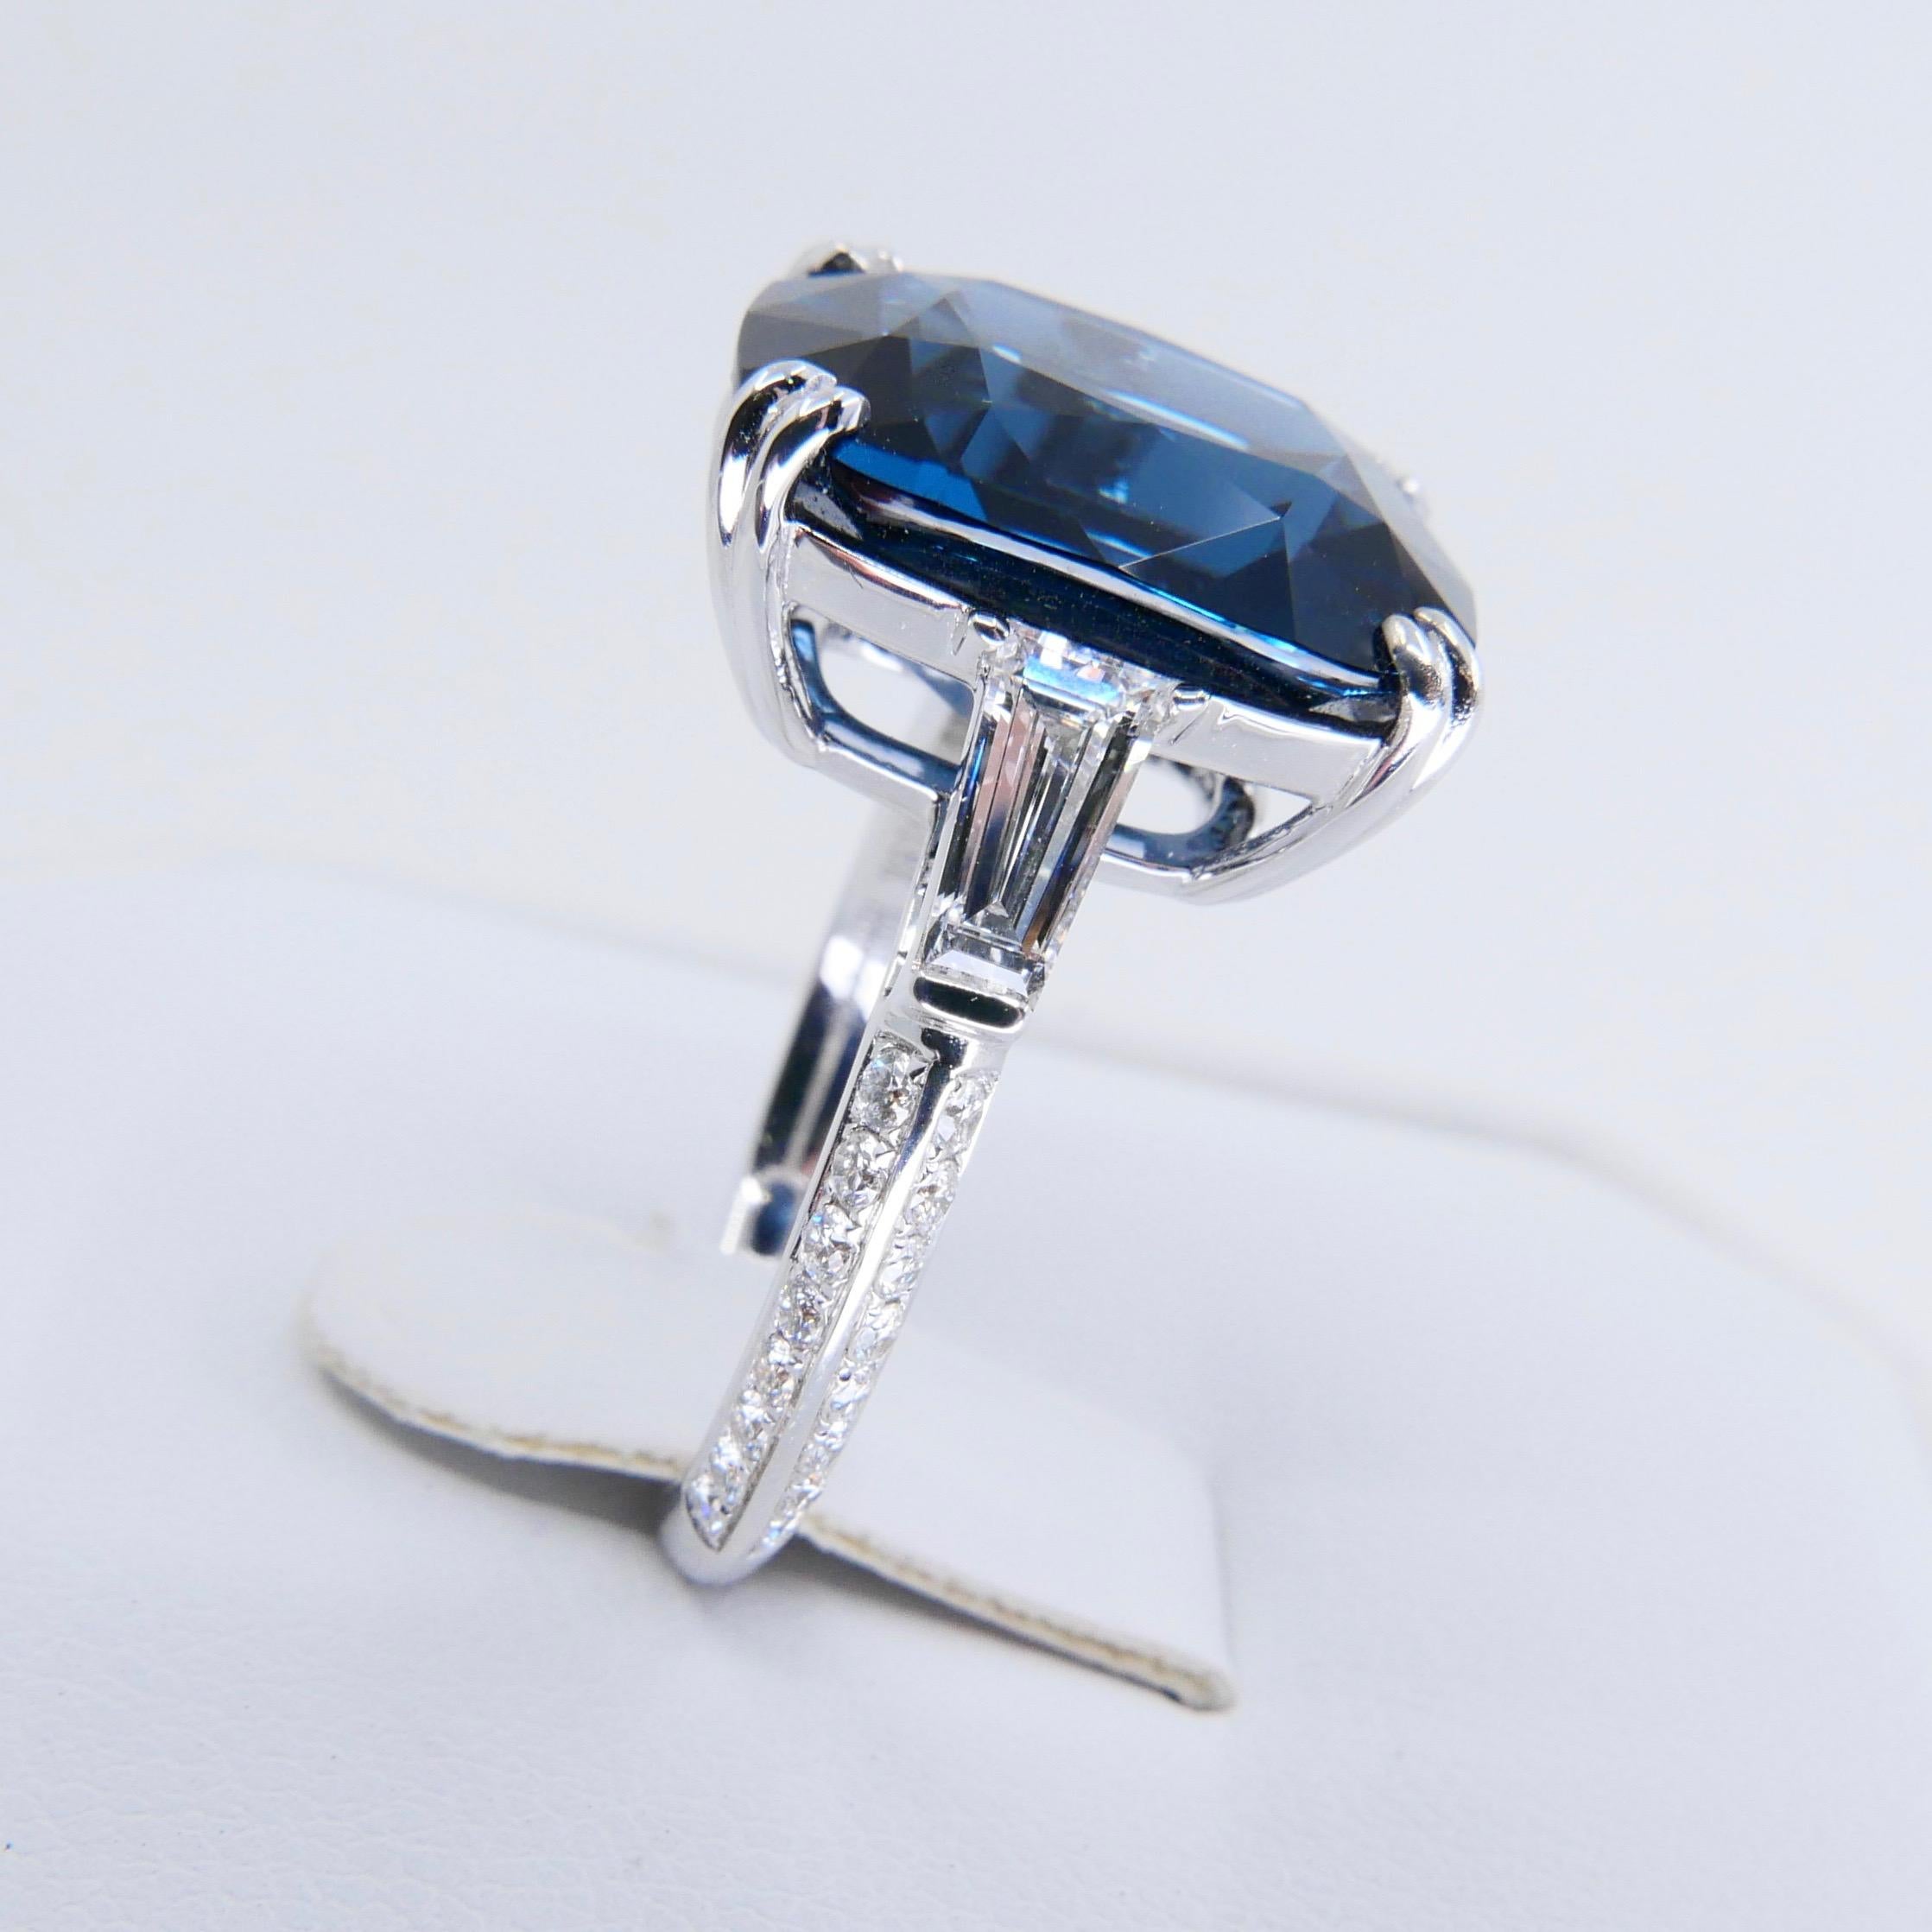 Important Certified 10.10 Carat Cobalt Spinel Diamond Cocktail Ring. Exquisite. 7